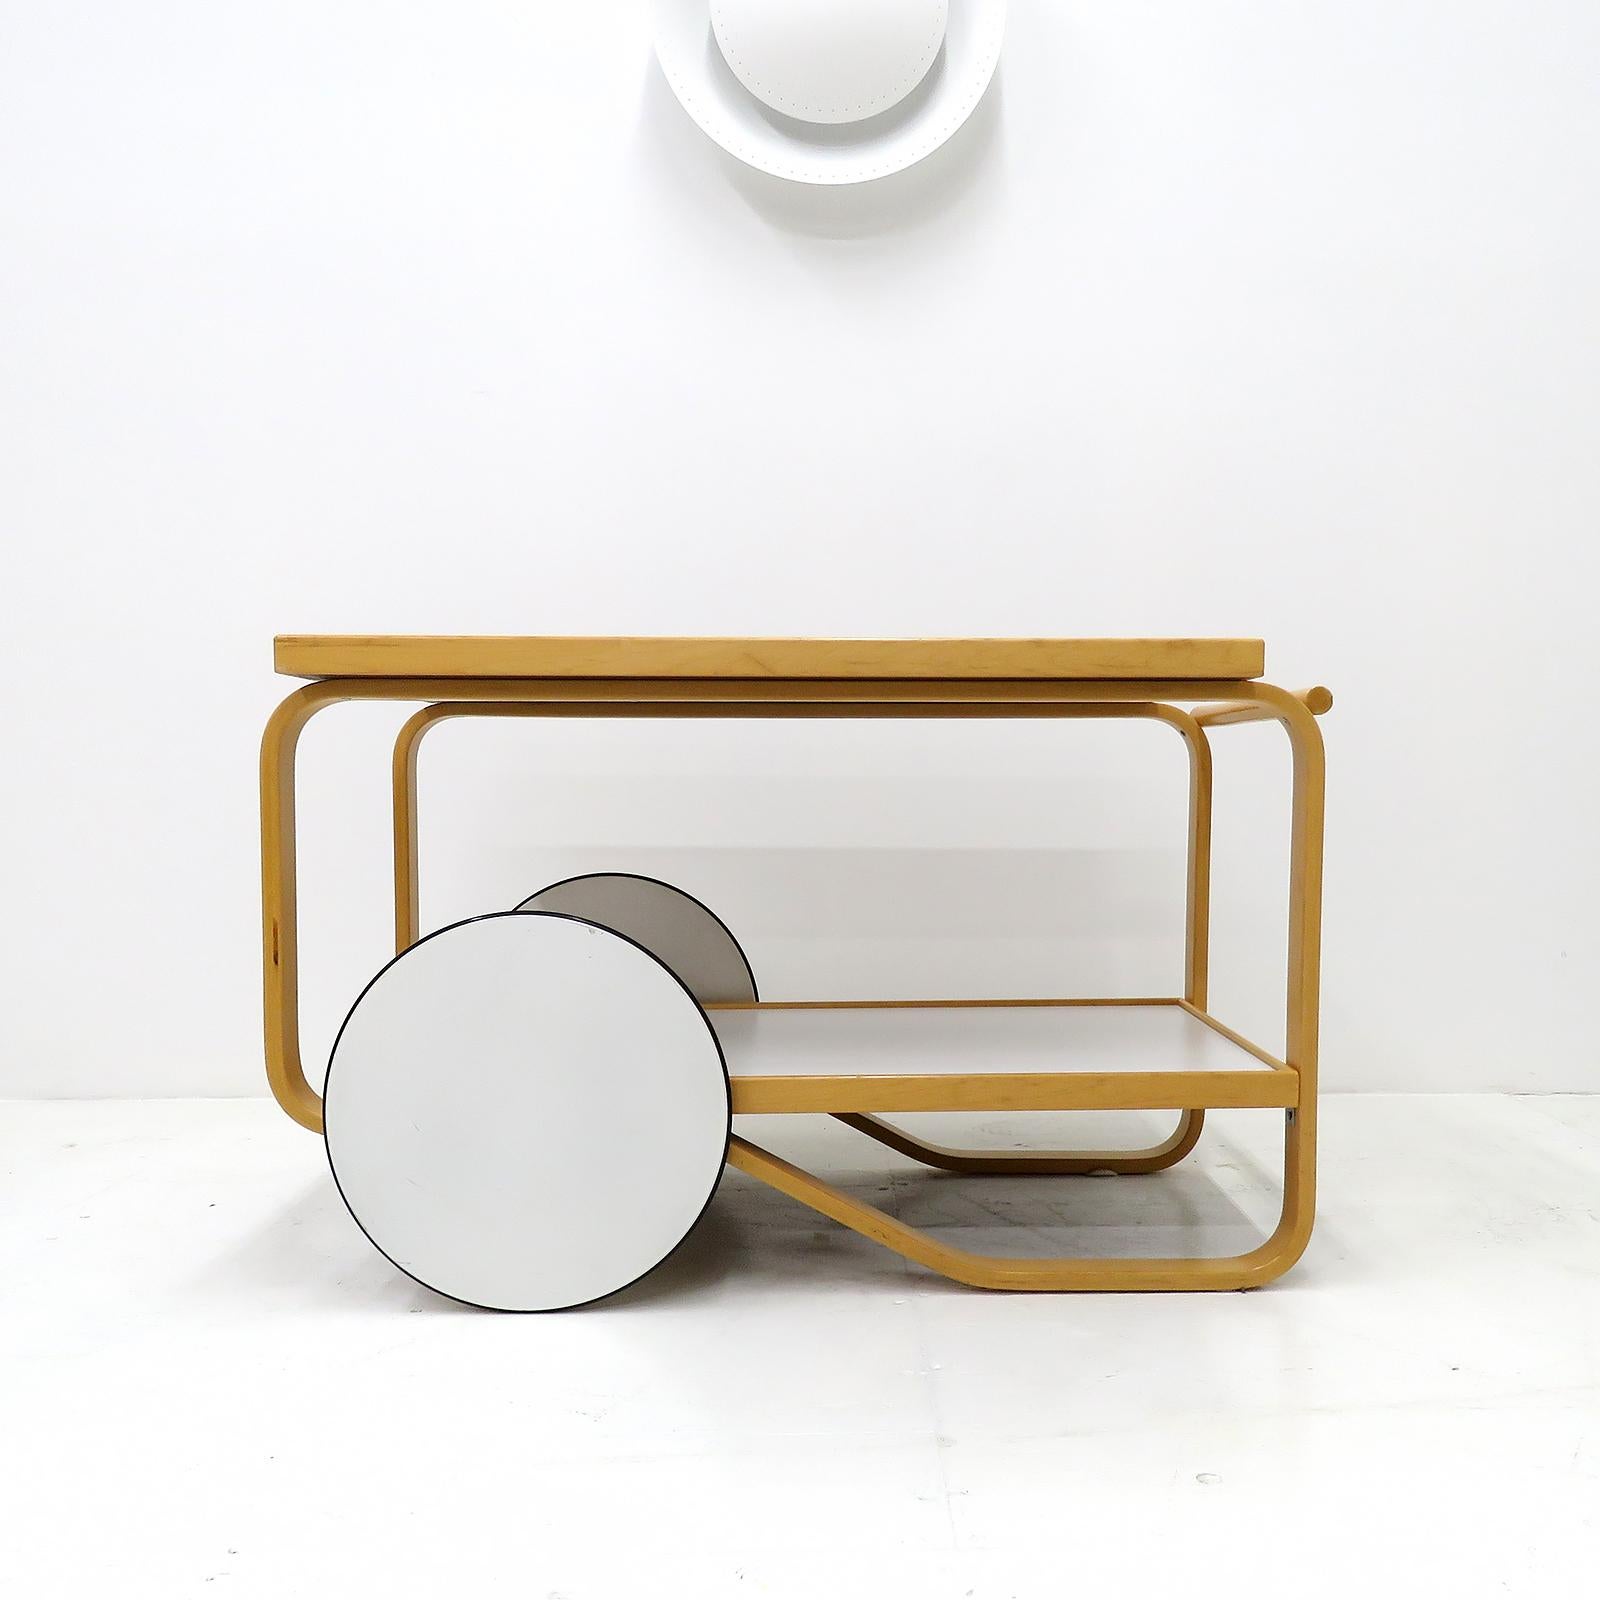 wonderful Model 901 tea trolley designed 1930 by Alvar Aalto for Artek, white linoleum top with bentwood birch frame and white lacquered wood wheels with rubber rings. Good original condition.